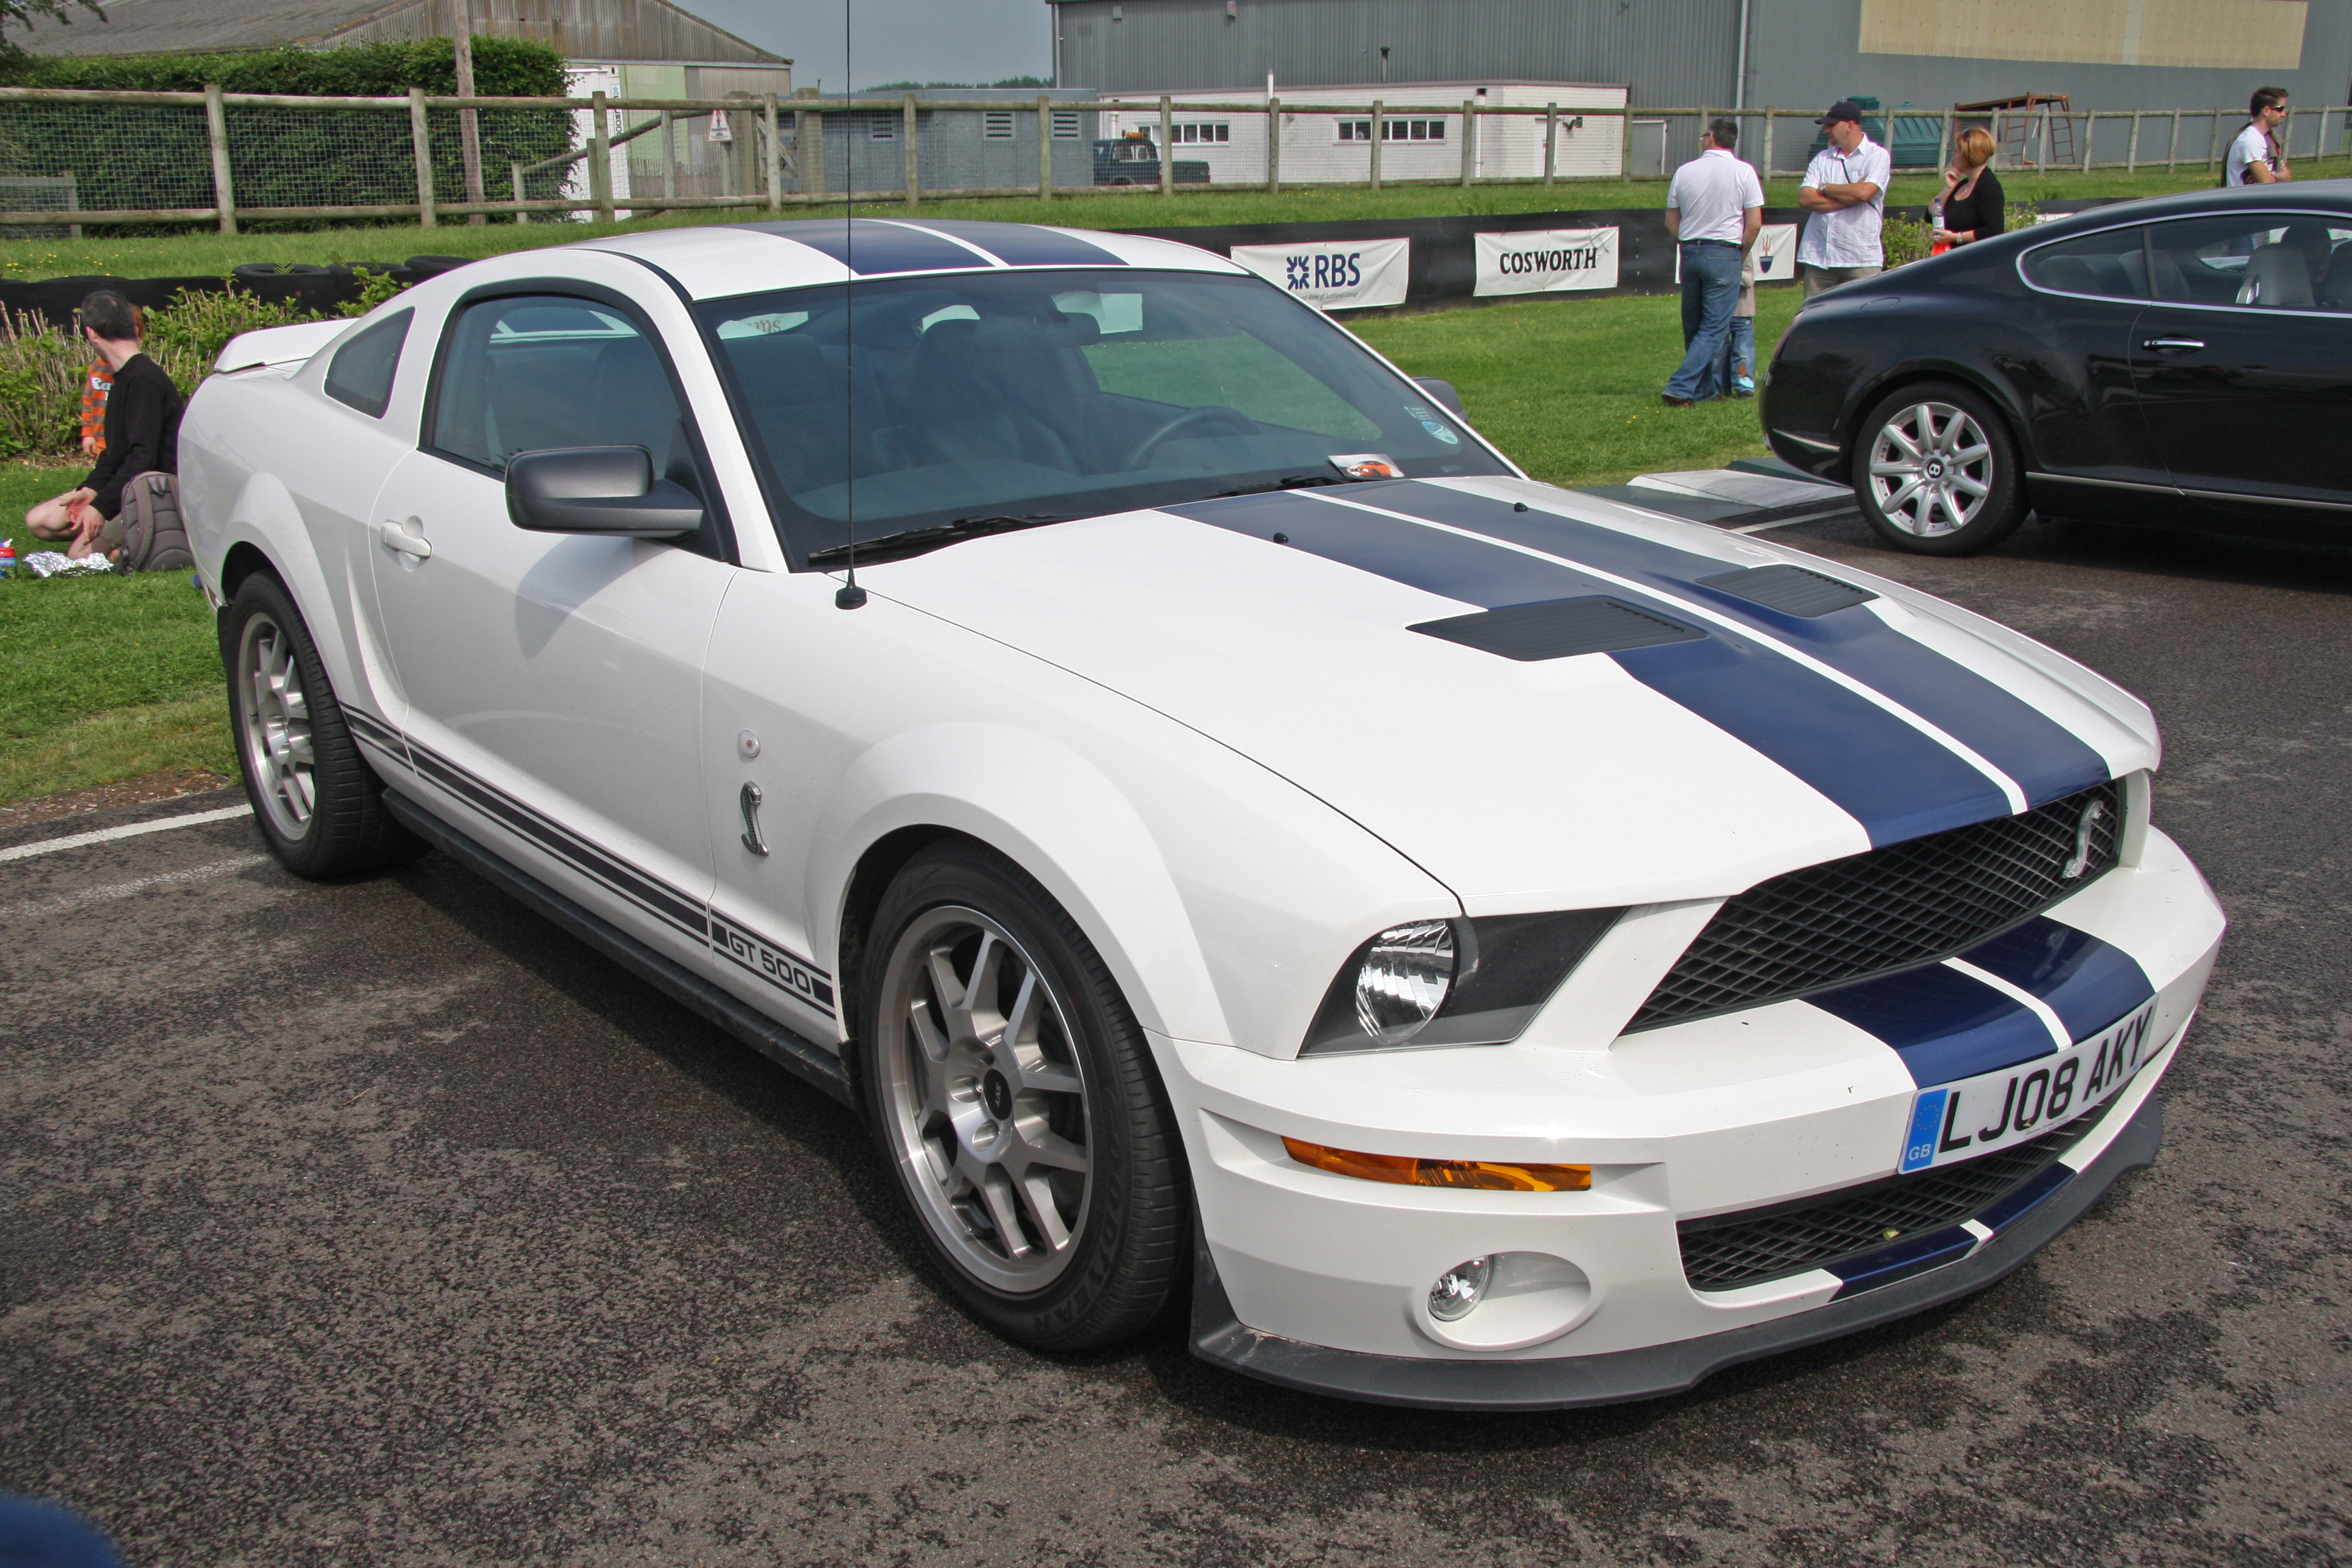 File:Ford Mustang Shelby GT 500 - Flickr - exfordy.jpg - Wikimedia ...